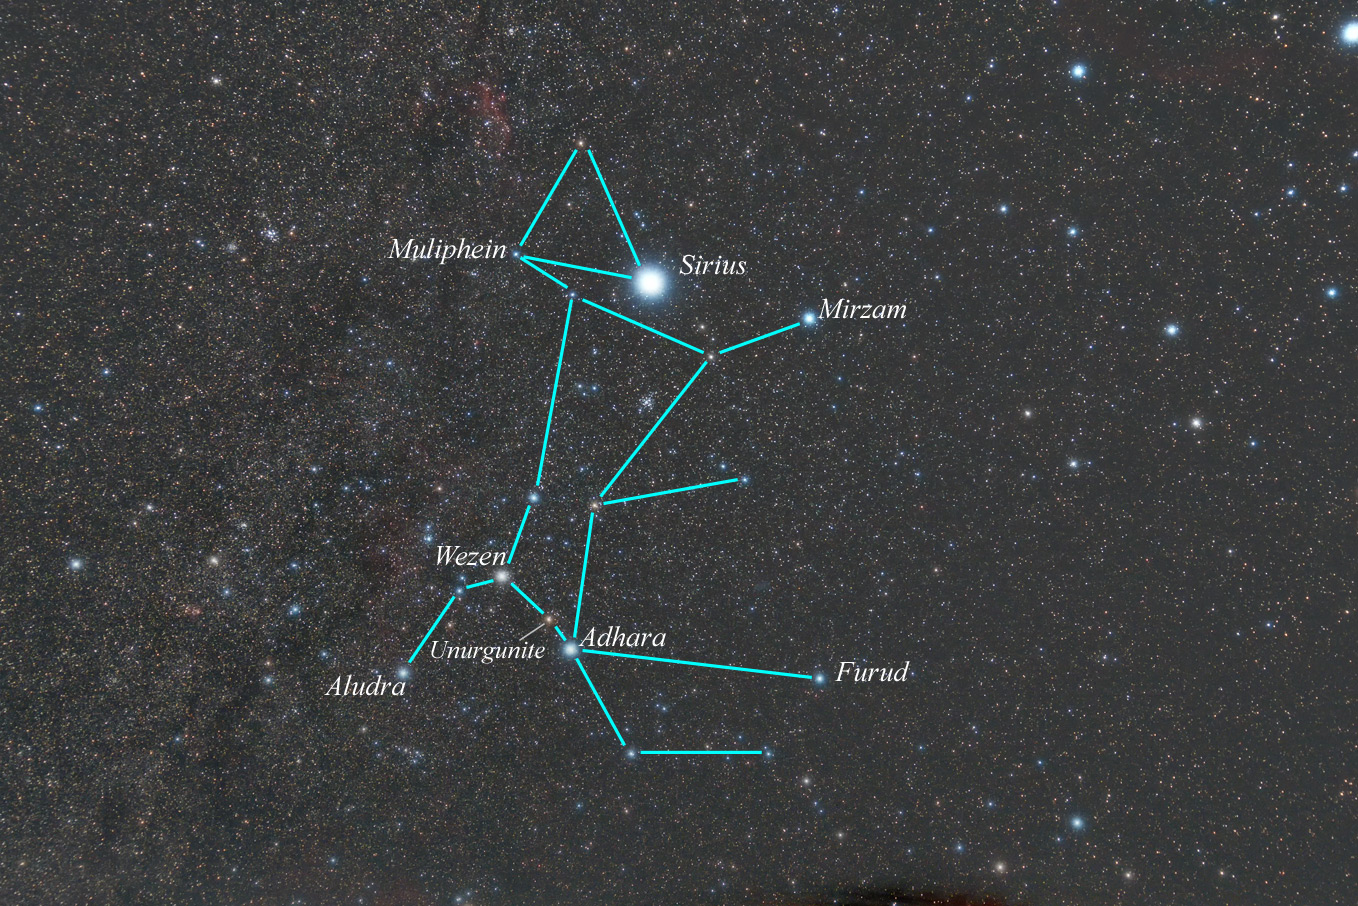 Brightest Star In The Night Sky: Sirius In Canis Major 